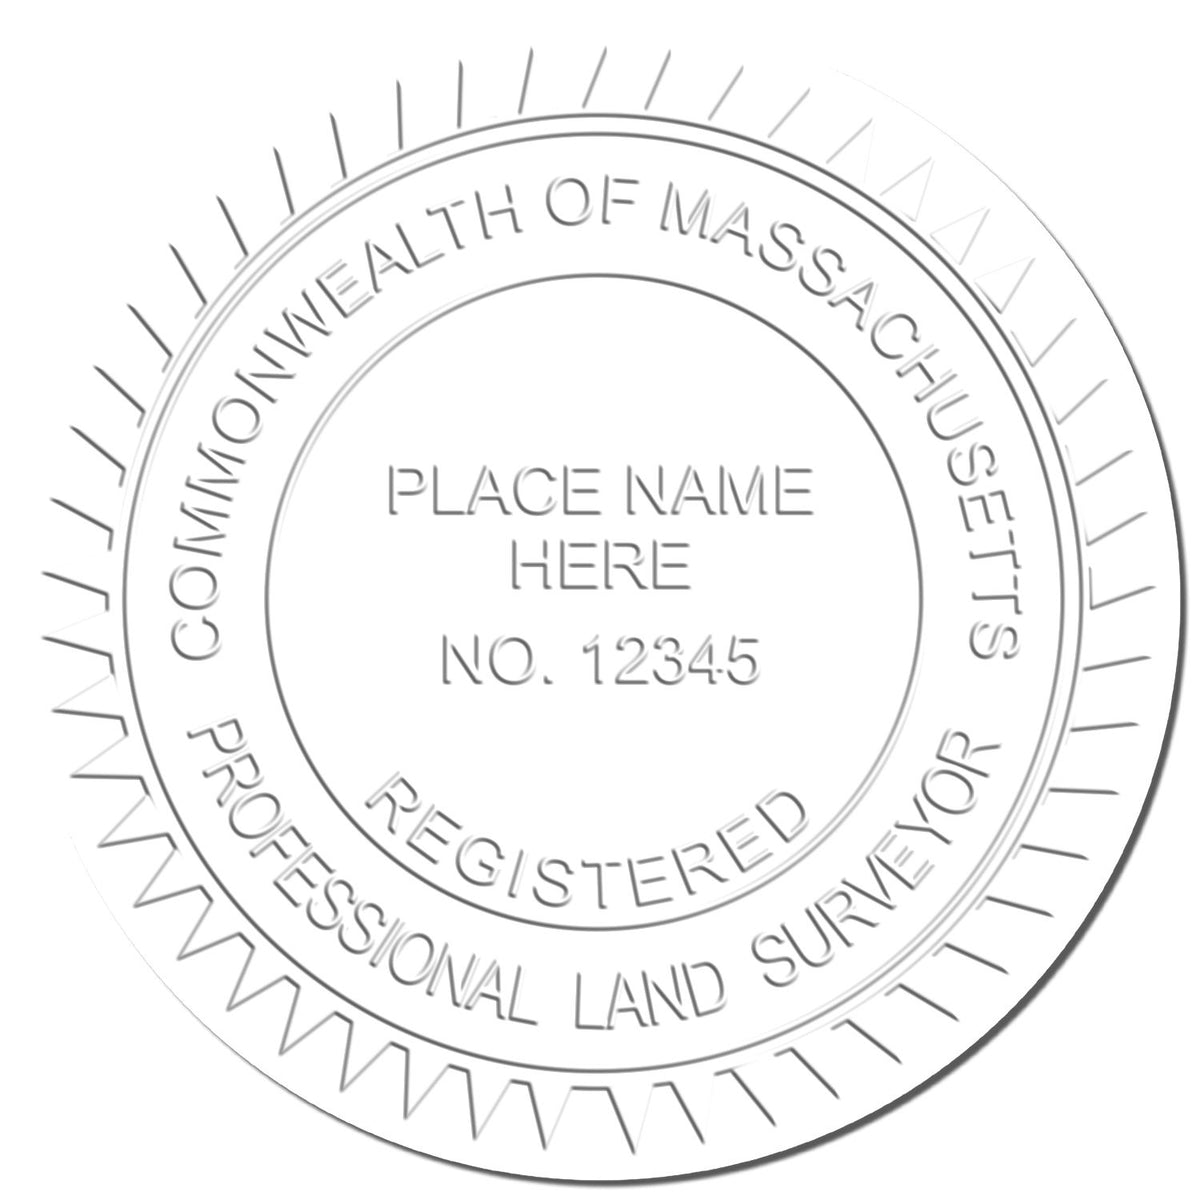 This paper is stamped with a sample imprint of the State of Massachusetts Soft Land Surveyor Embossing Seal, signifying its quality and reliability.